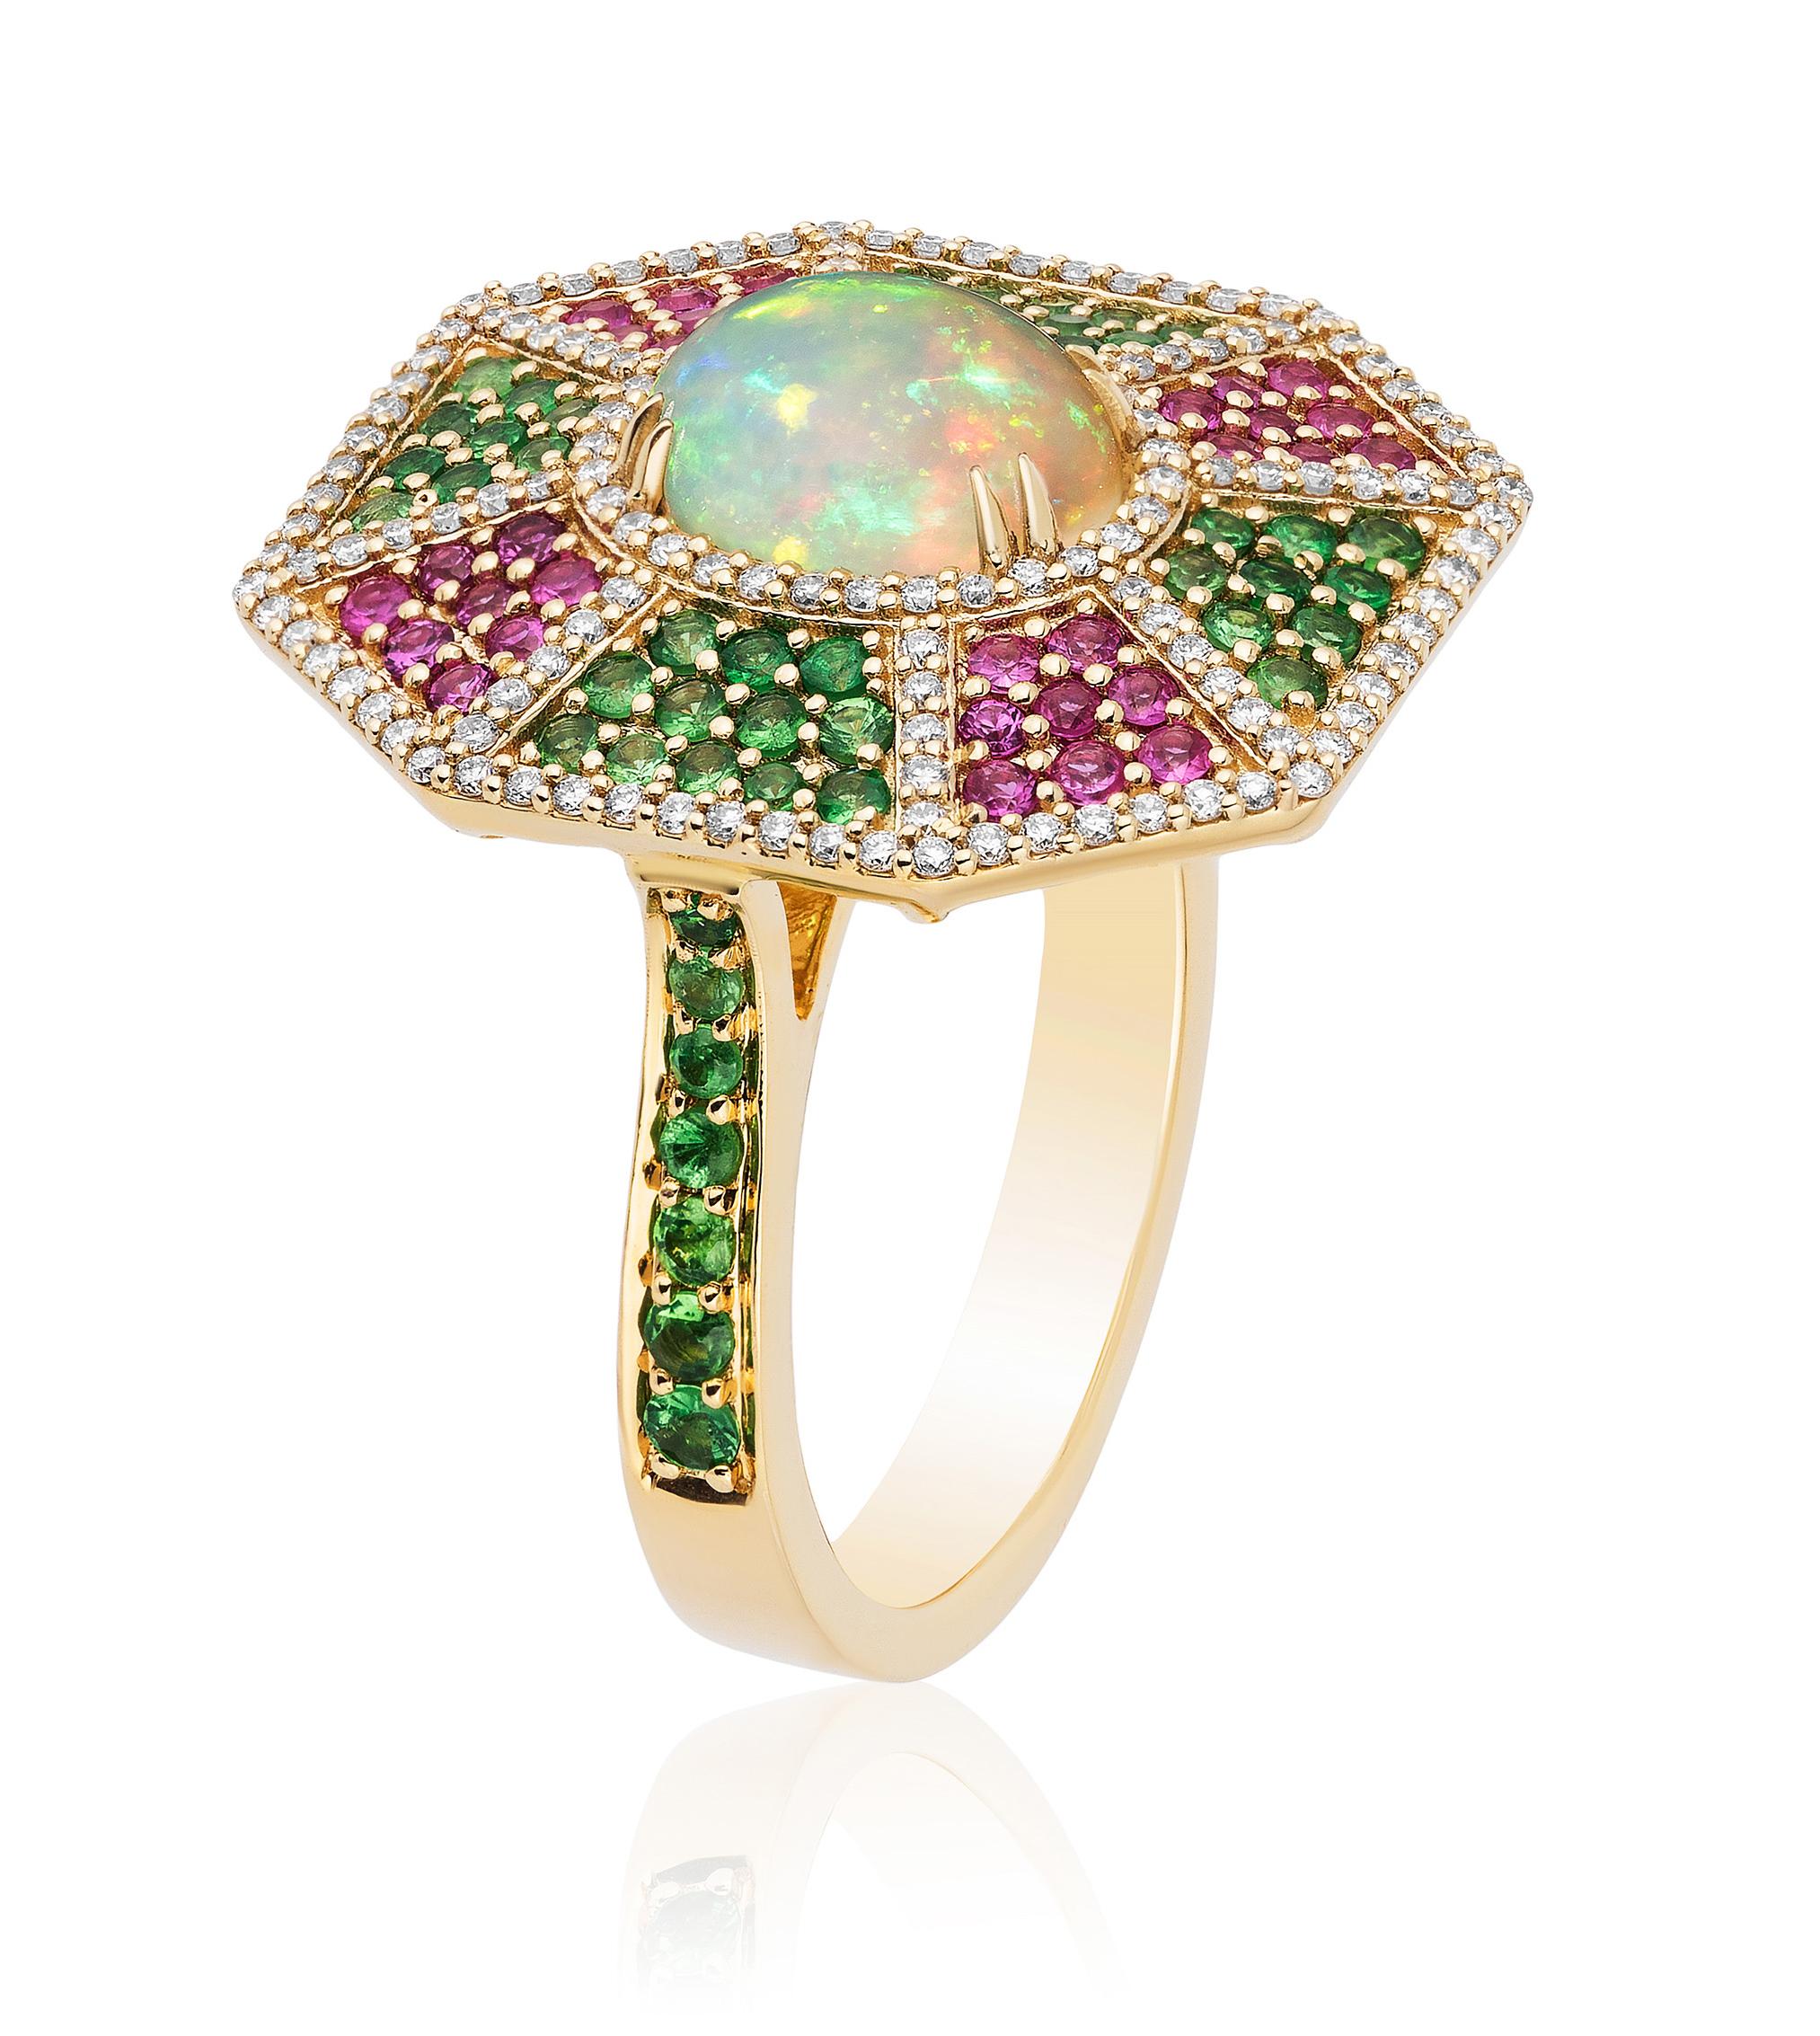 Opal, Tsavorite, Pink Sapphire Octagon Ring with Diamond in 18k Yellow Gold, from 'G-One' Collection

Stone size: 9 x 7 mm

Gemstone Weight : Opal - 1.18 Carats. 
                                 Pink Sapphire - 0.35 Carats . 
                      